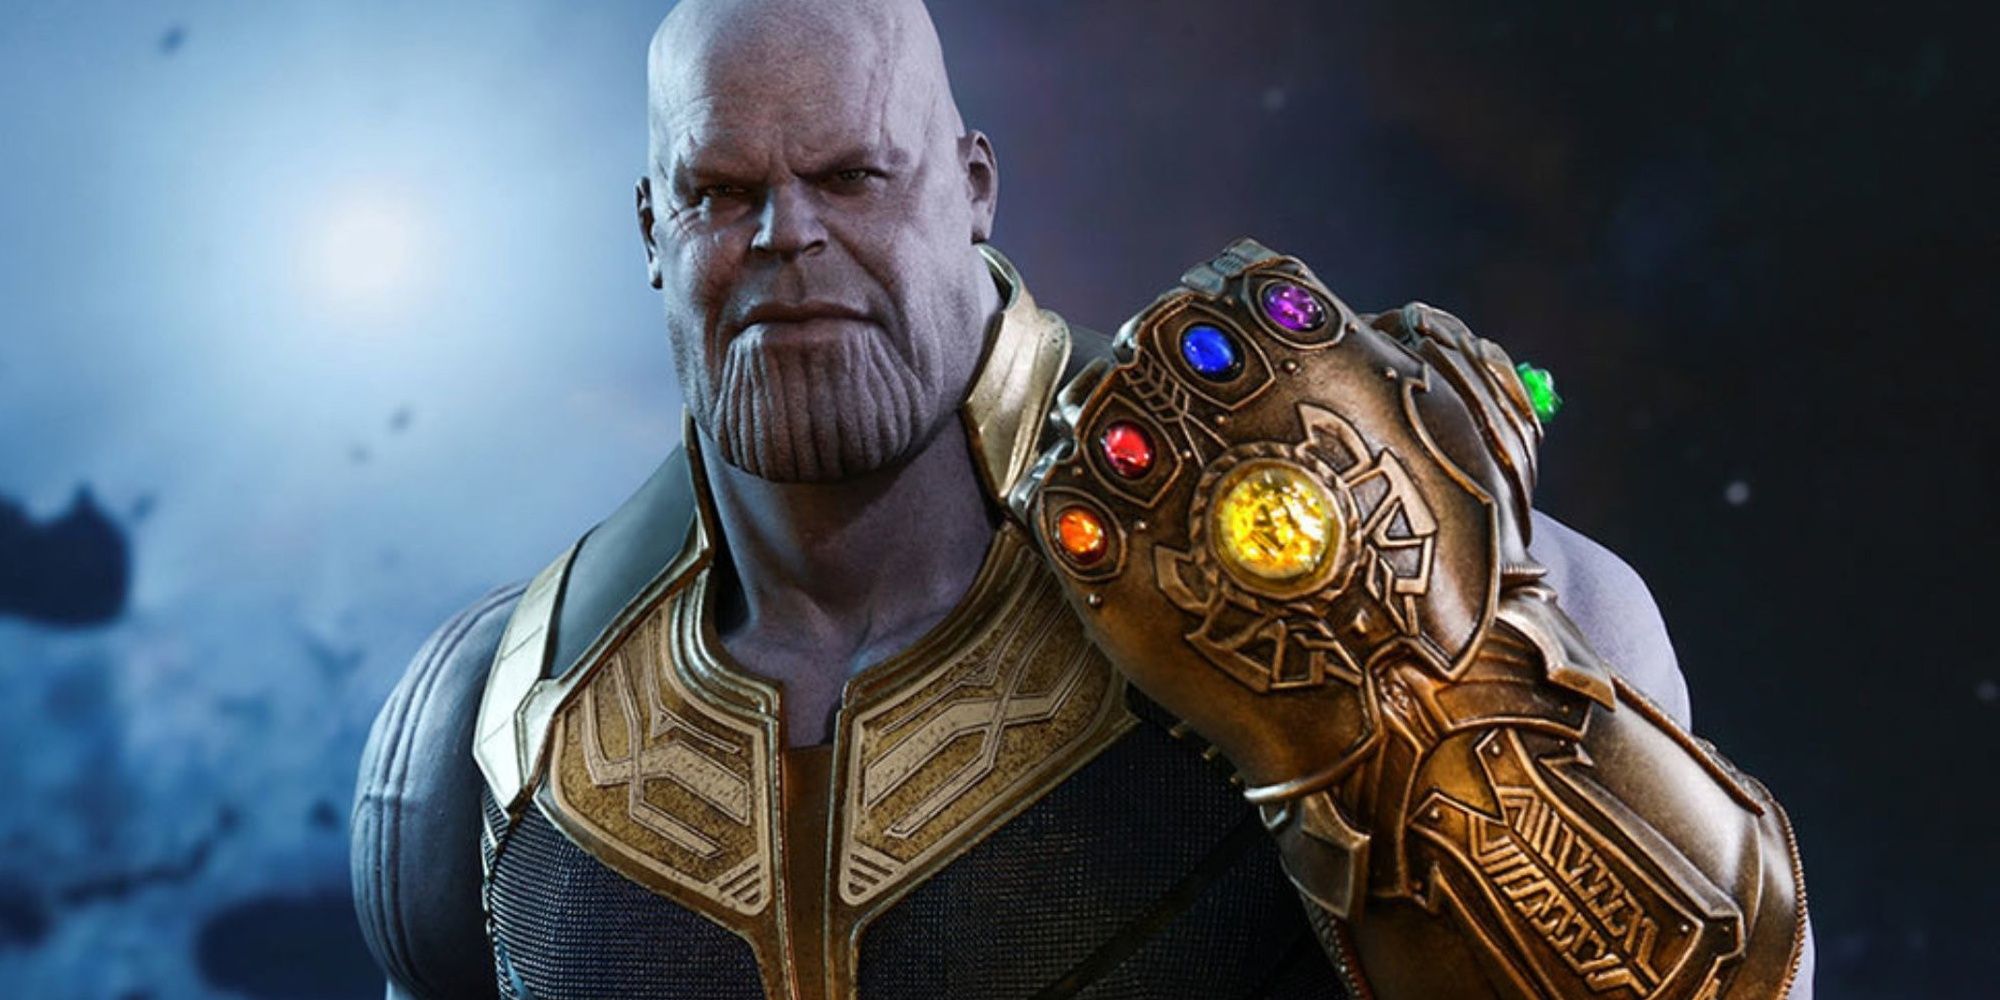 Thanos with a full Infinity Gauntlet